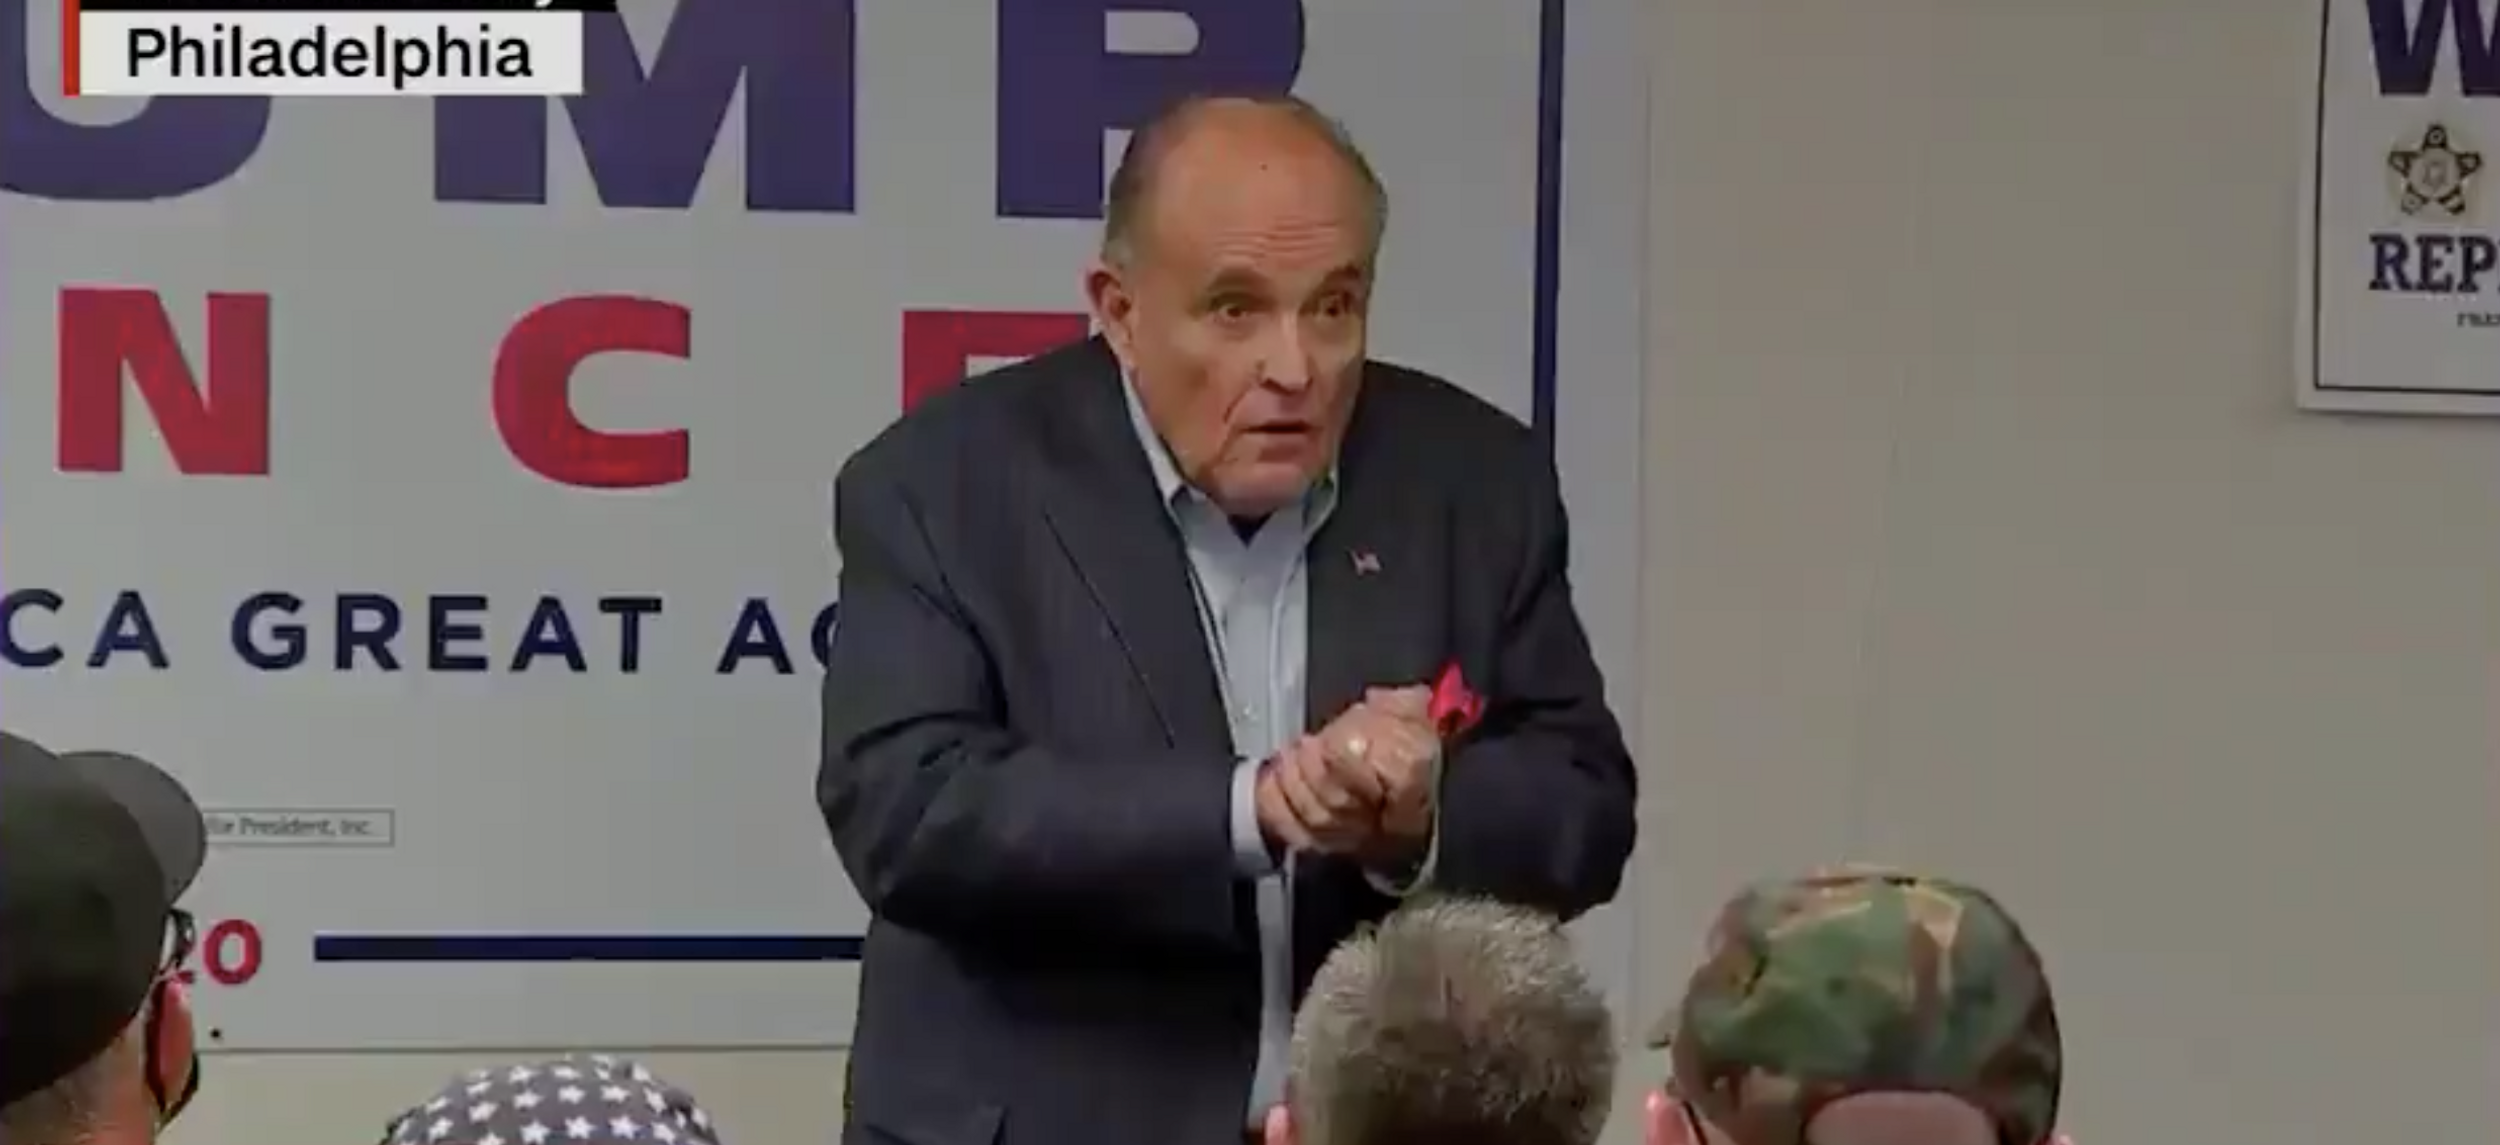 Rudy Giuliani Dragged After Claiming 'People Don't Die of This Disease Anymore' at Trump Campaign Event